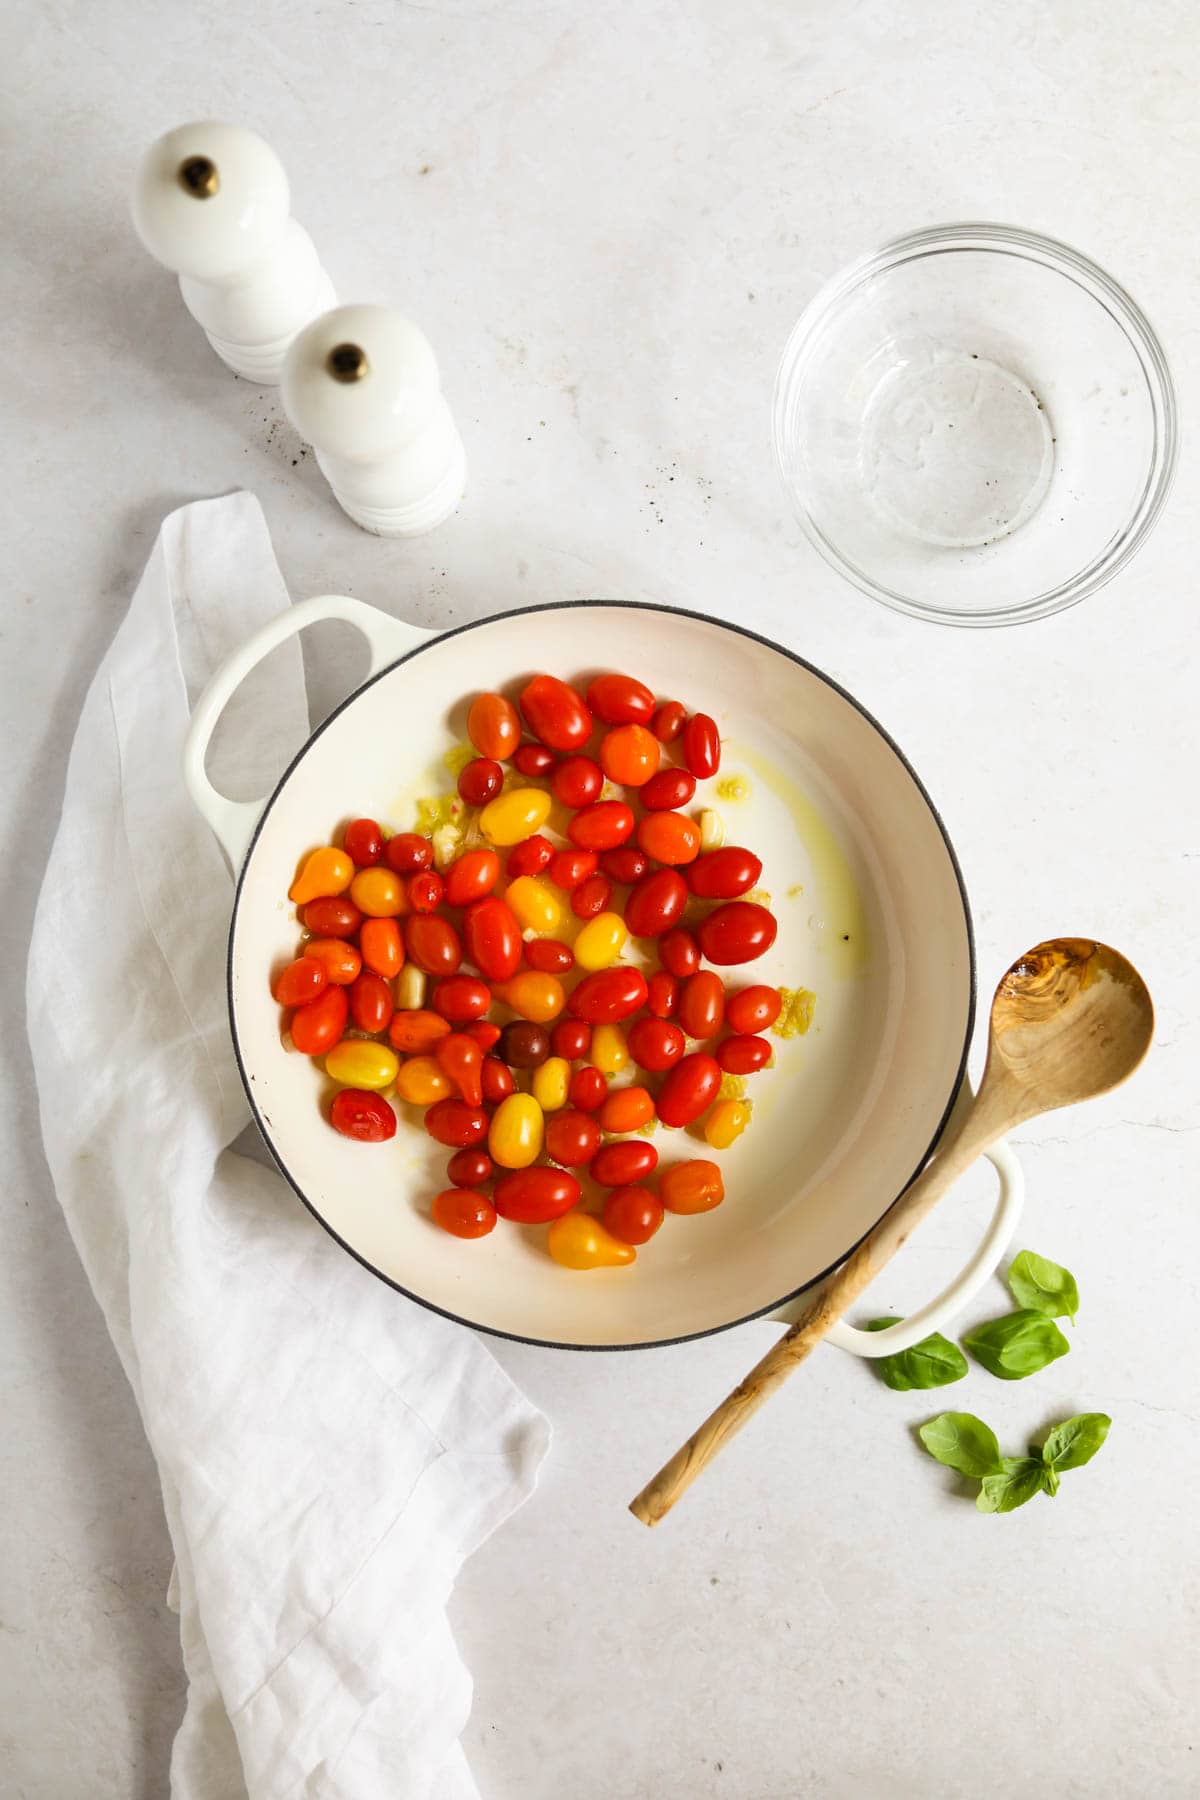 Fresh cherry tomatoes cooking in olive oil, garlic, and shallots.